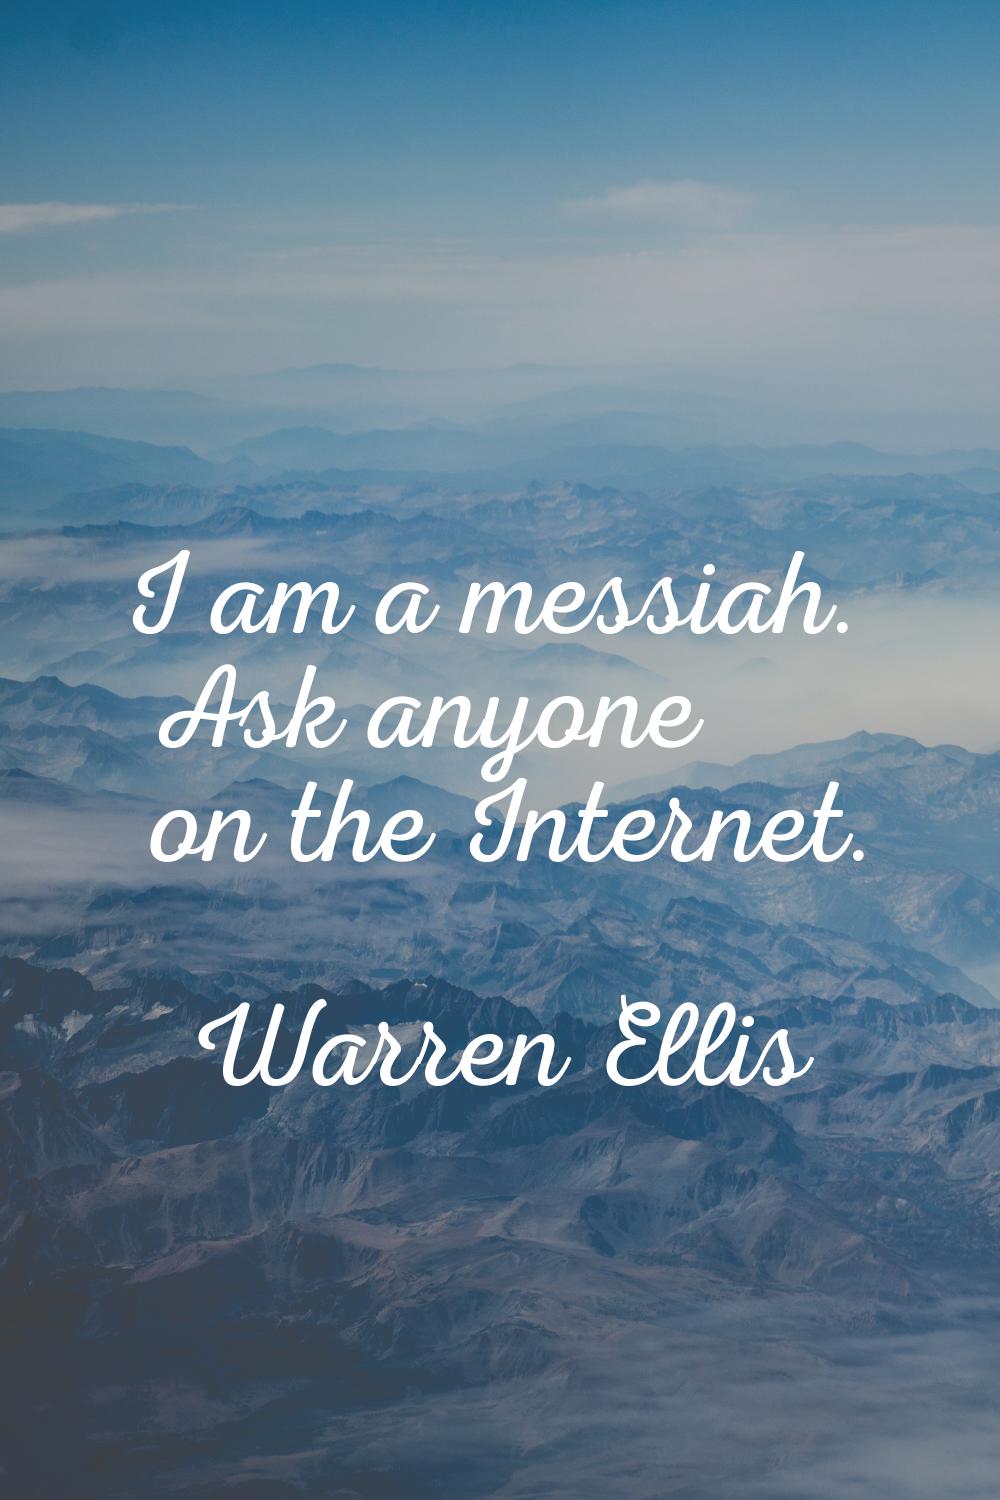 I am a messiah. Ask anyone on the Internet.